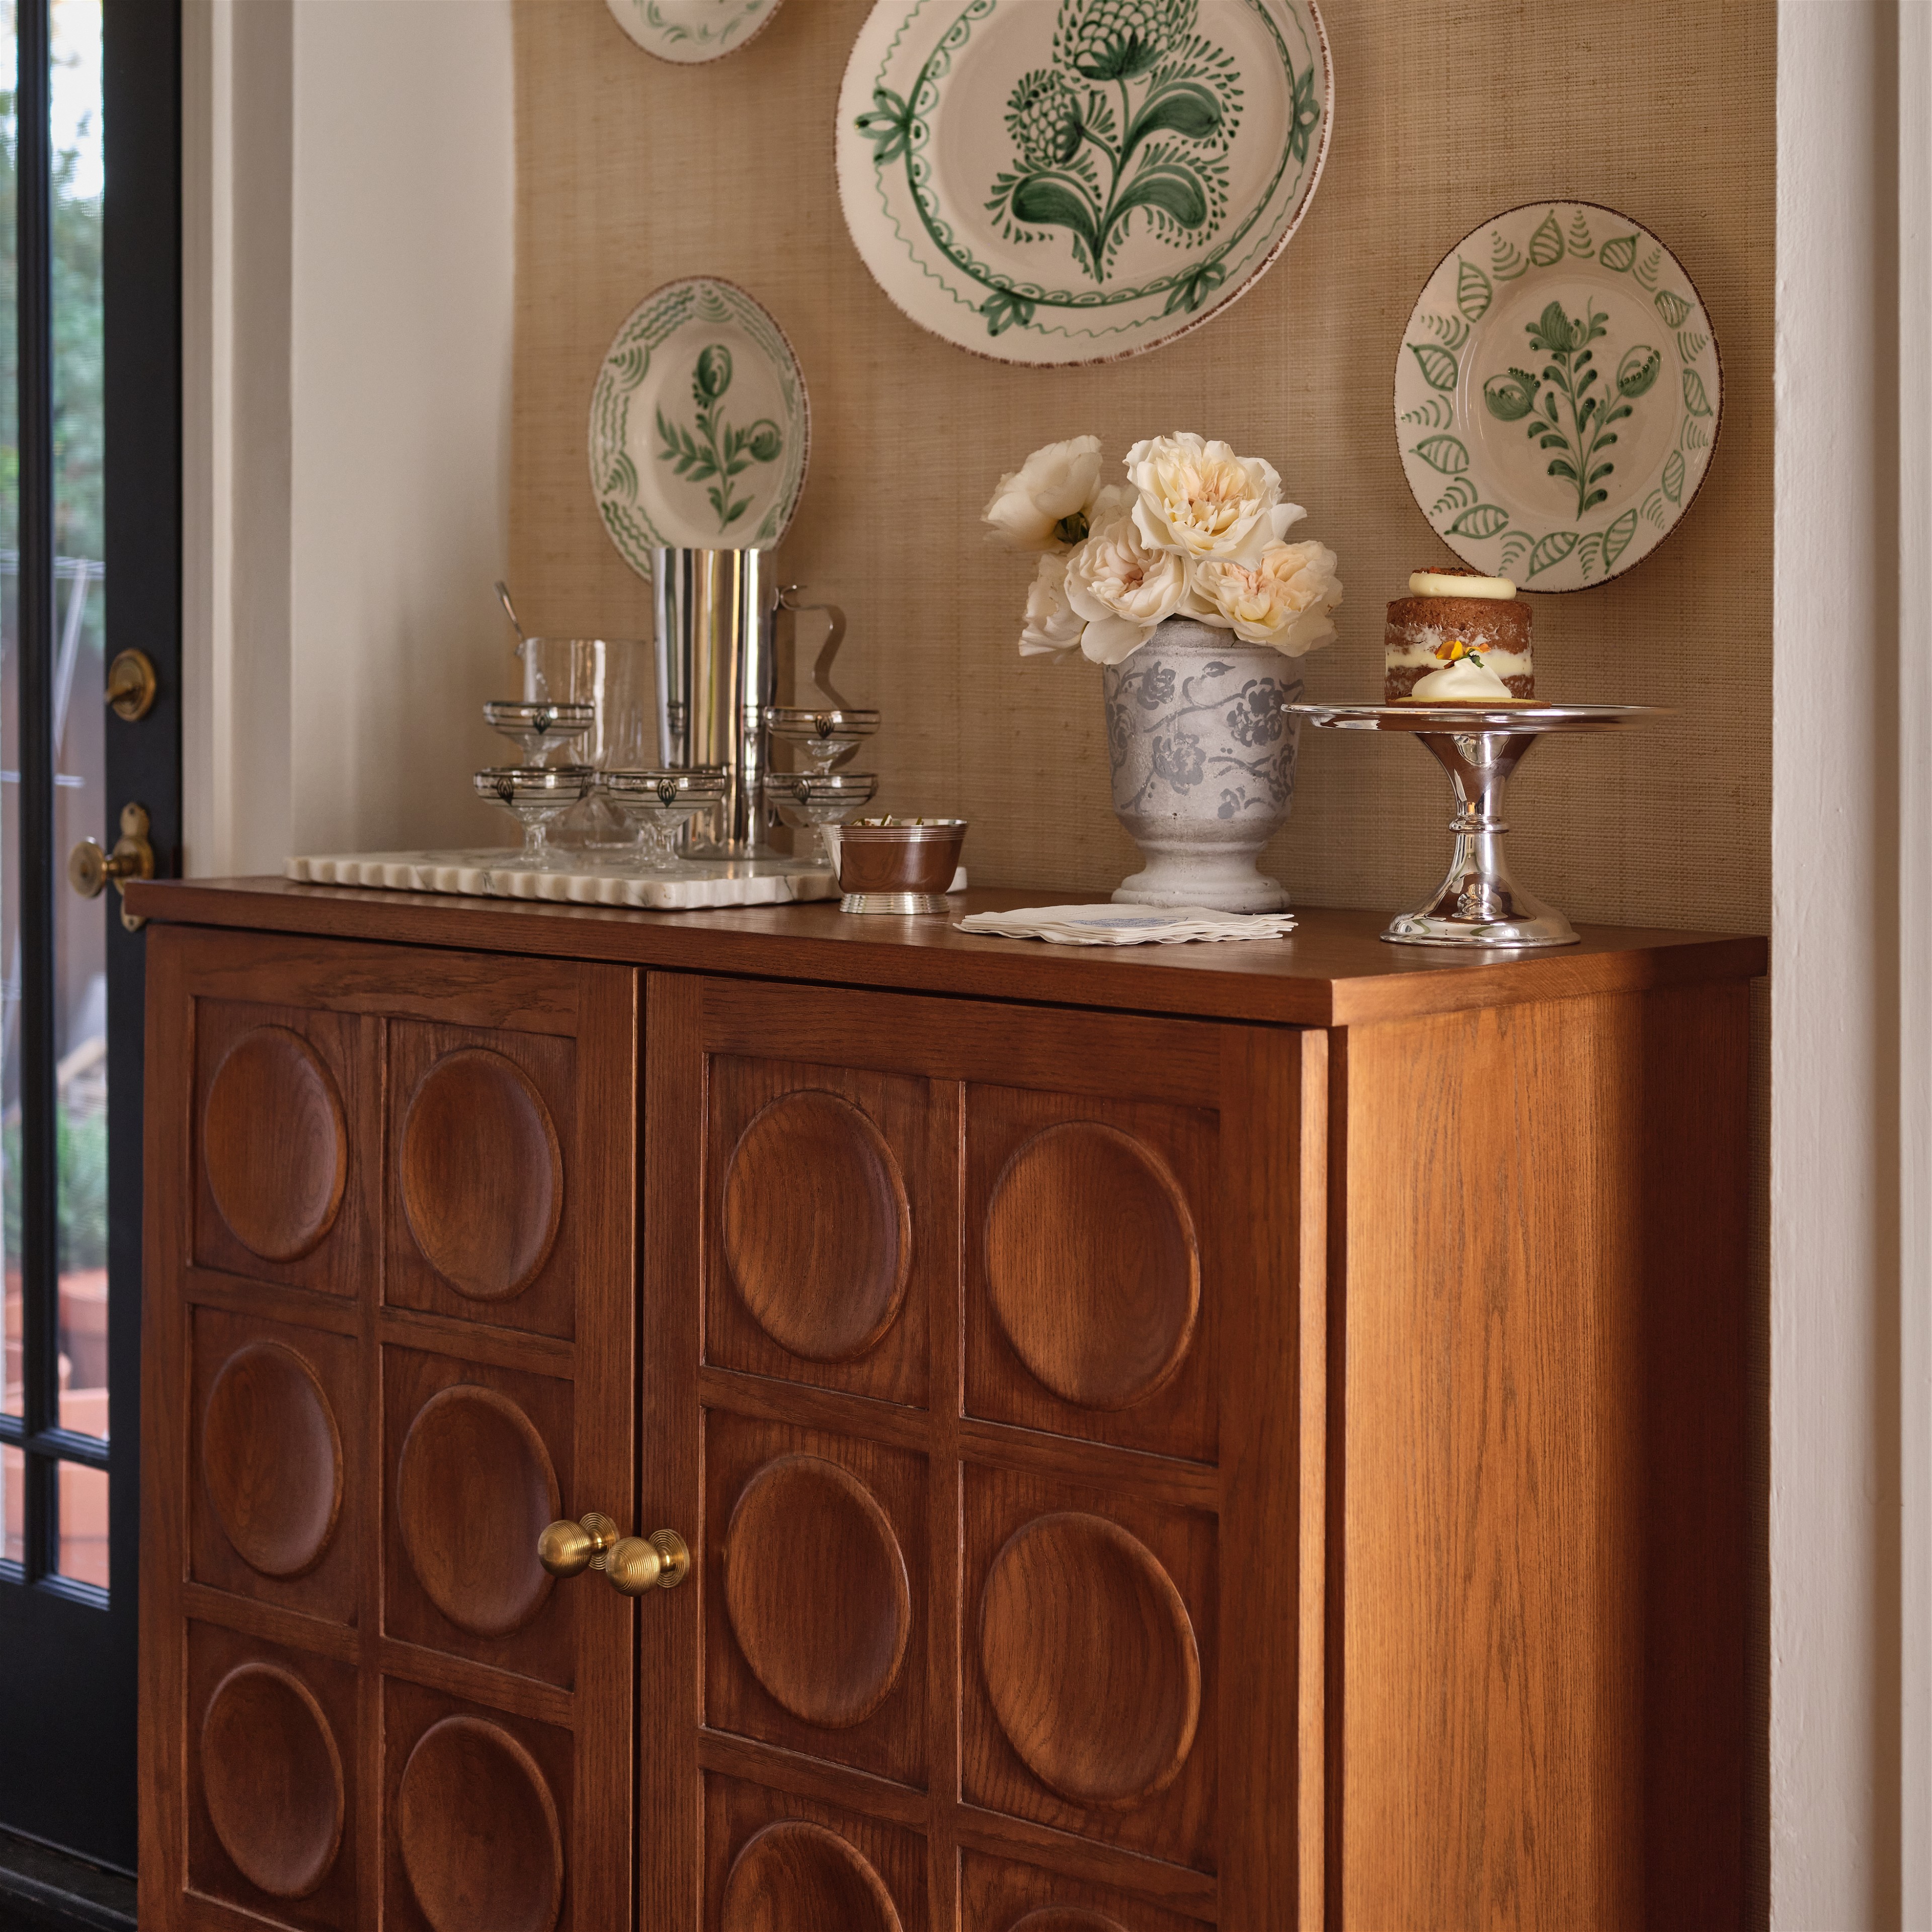 a sideboard with plates and a vase on top of it